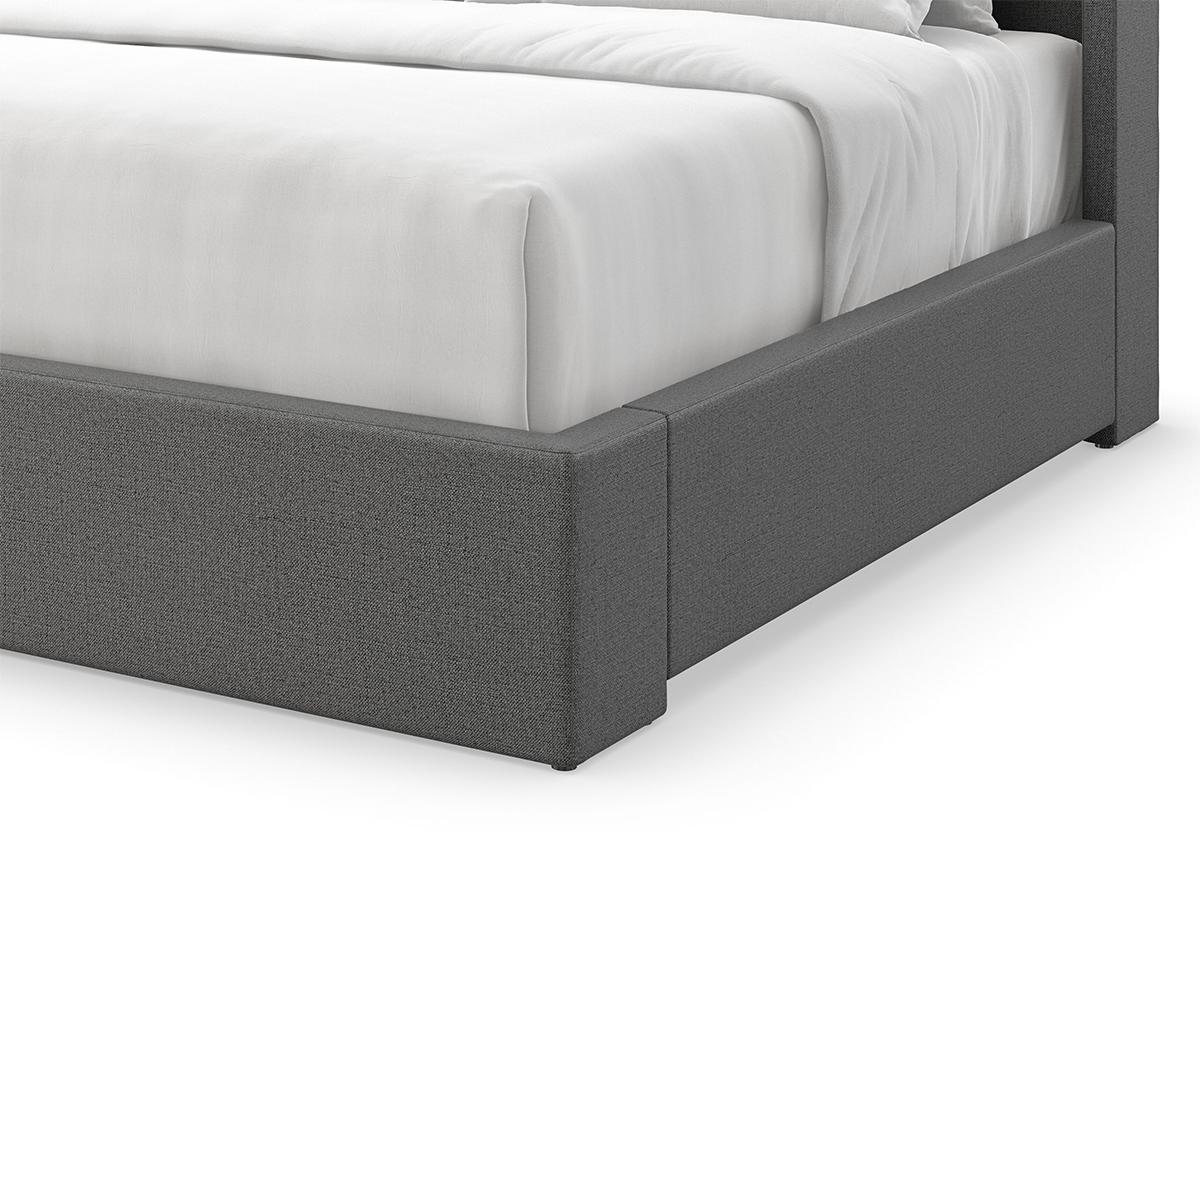 Flared Modern Fully Upholstered Queen Bed - Dark In New Condition For Sale In Westwood, NJ